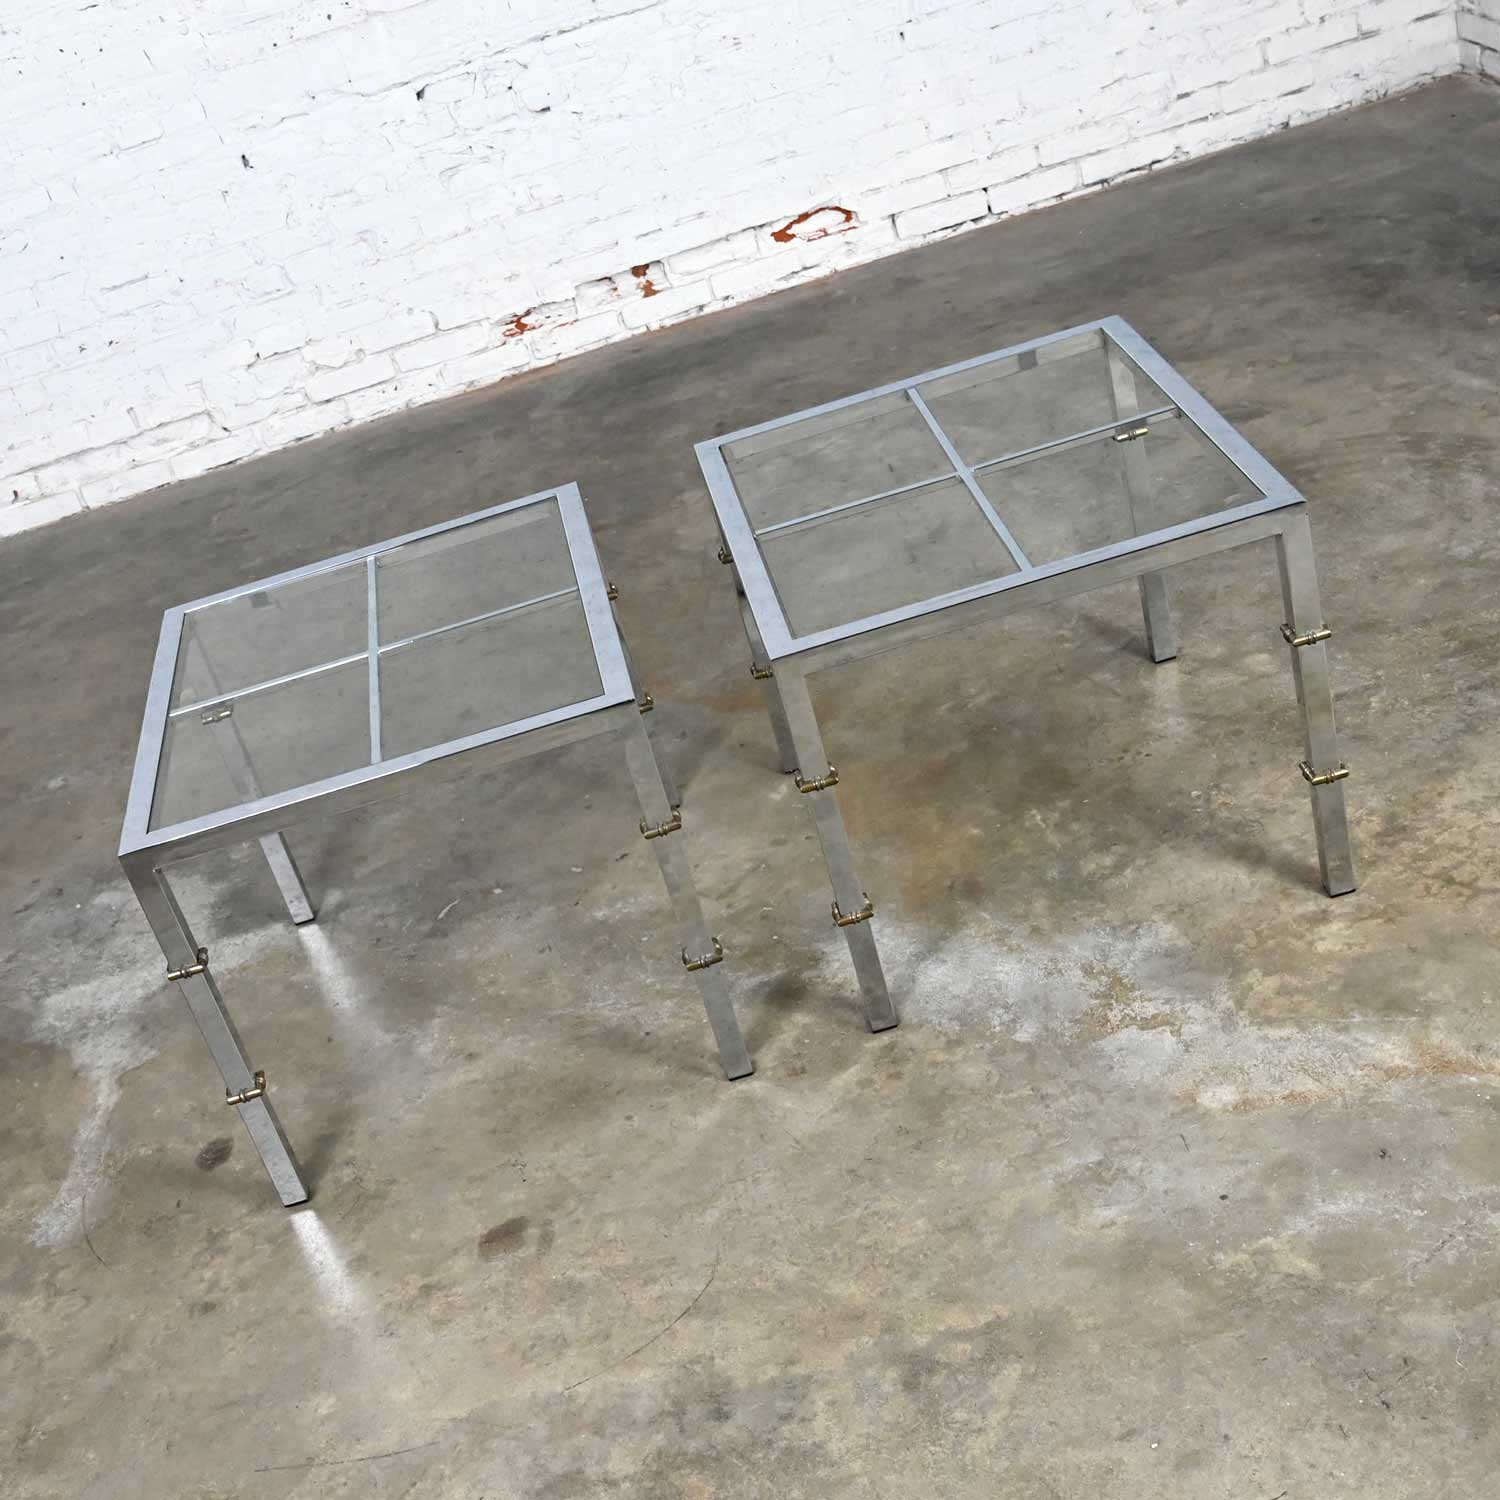 Hollywood Regency Chrome & Glass Square End Tables Brass Details a Pair Style of Maison Jansen